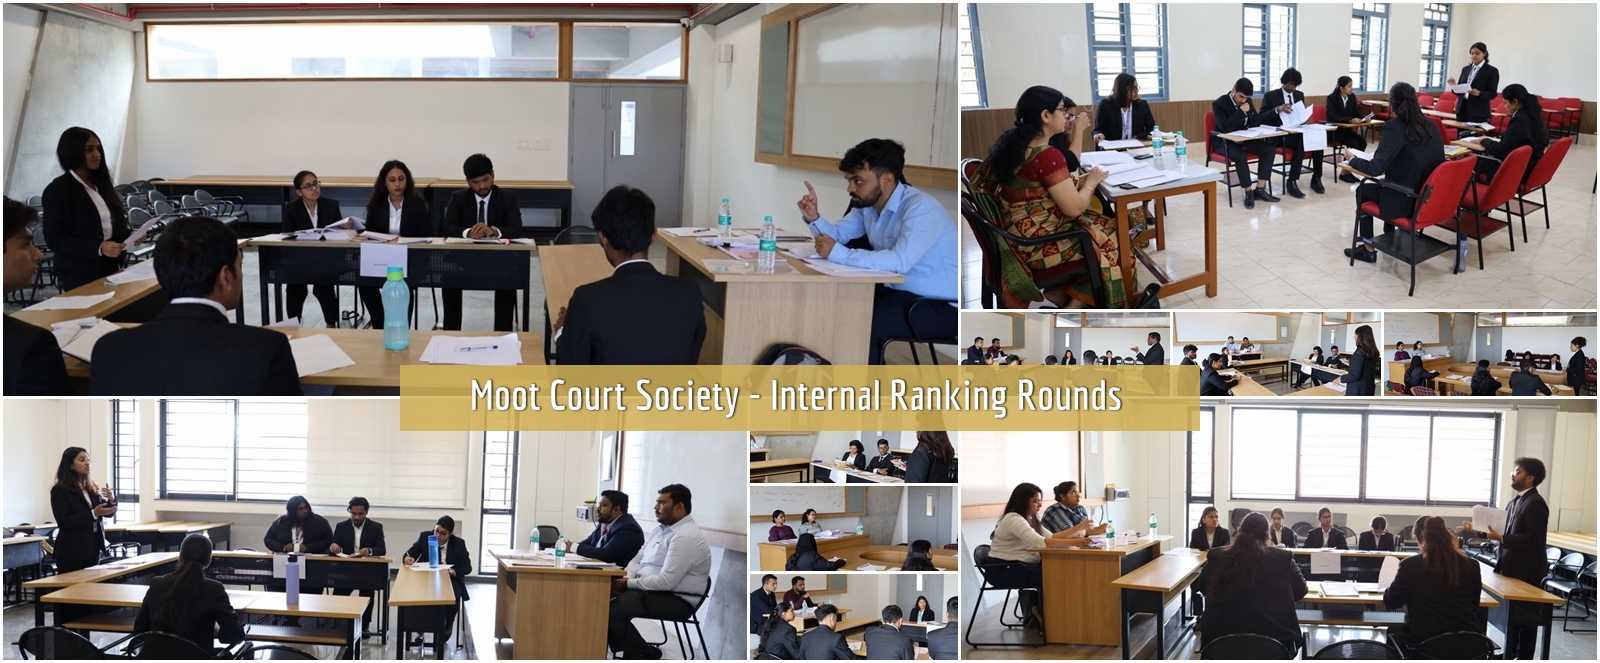 Moot Court Society - Internal Ranking Rounds